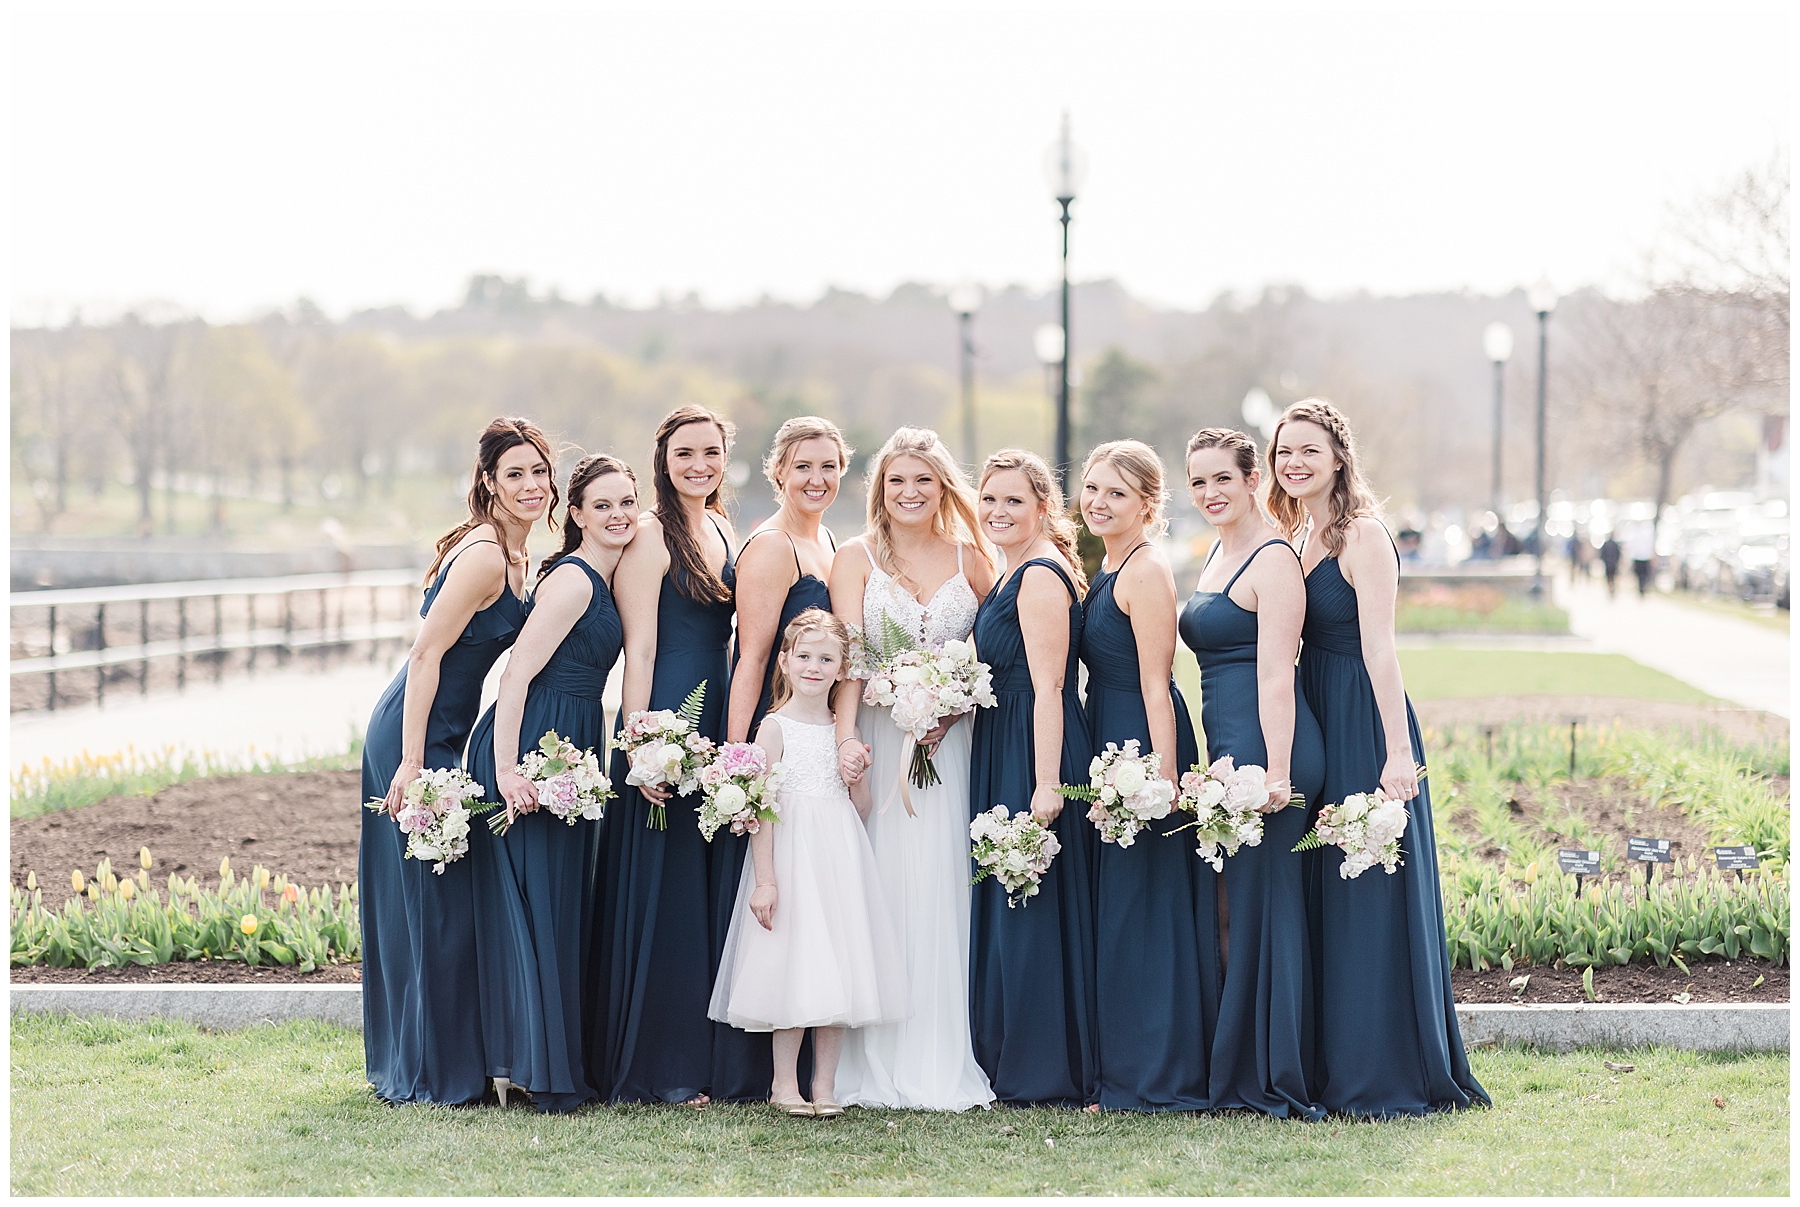 Bride and Bridesmaids stand with flower bouquets before wedding ceremony in Gloucester MA photographed by Stephanie Berenson